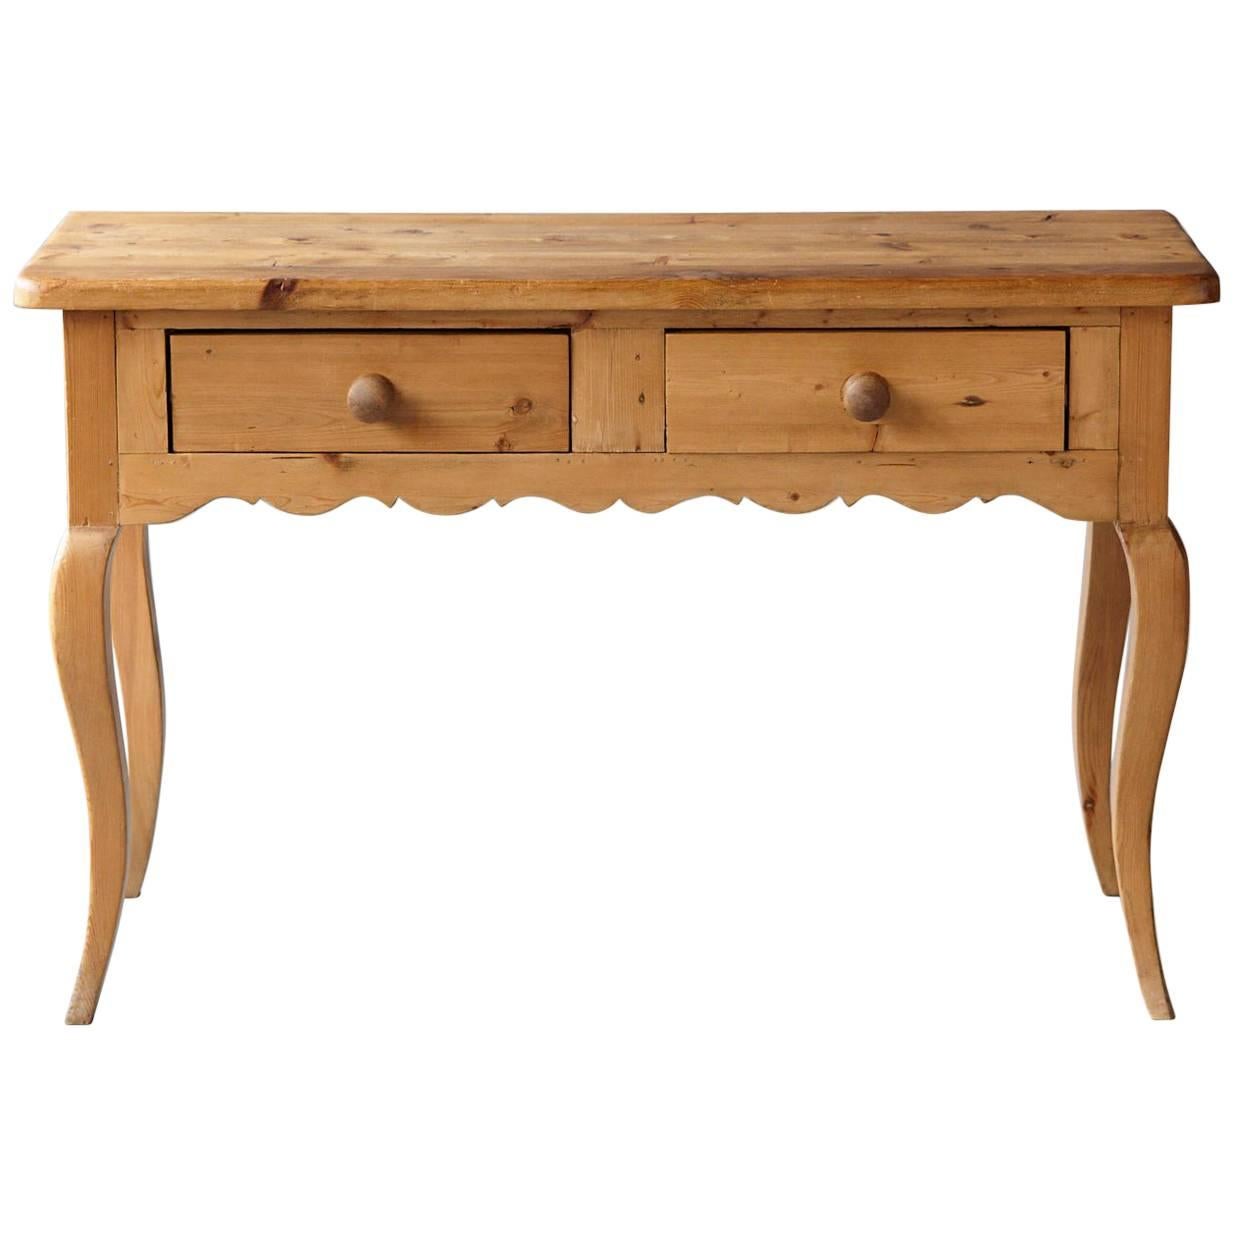 English Country Style Pine Console